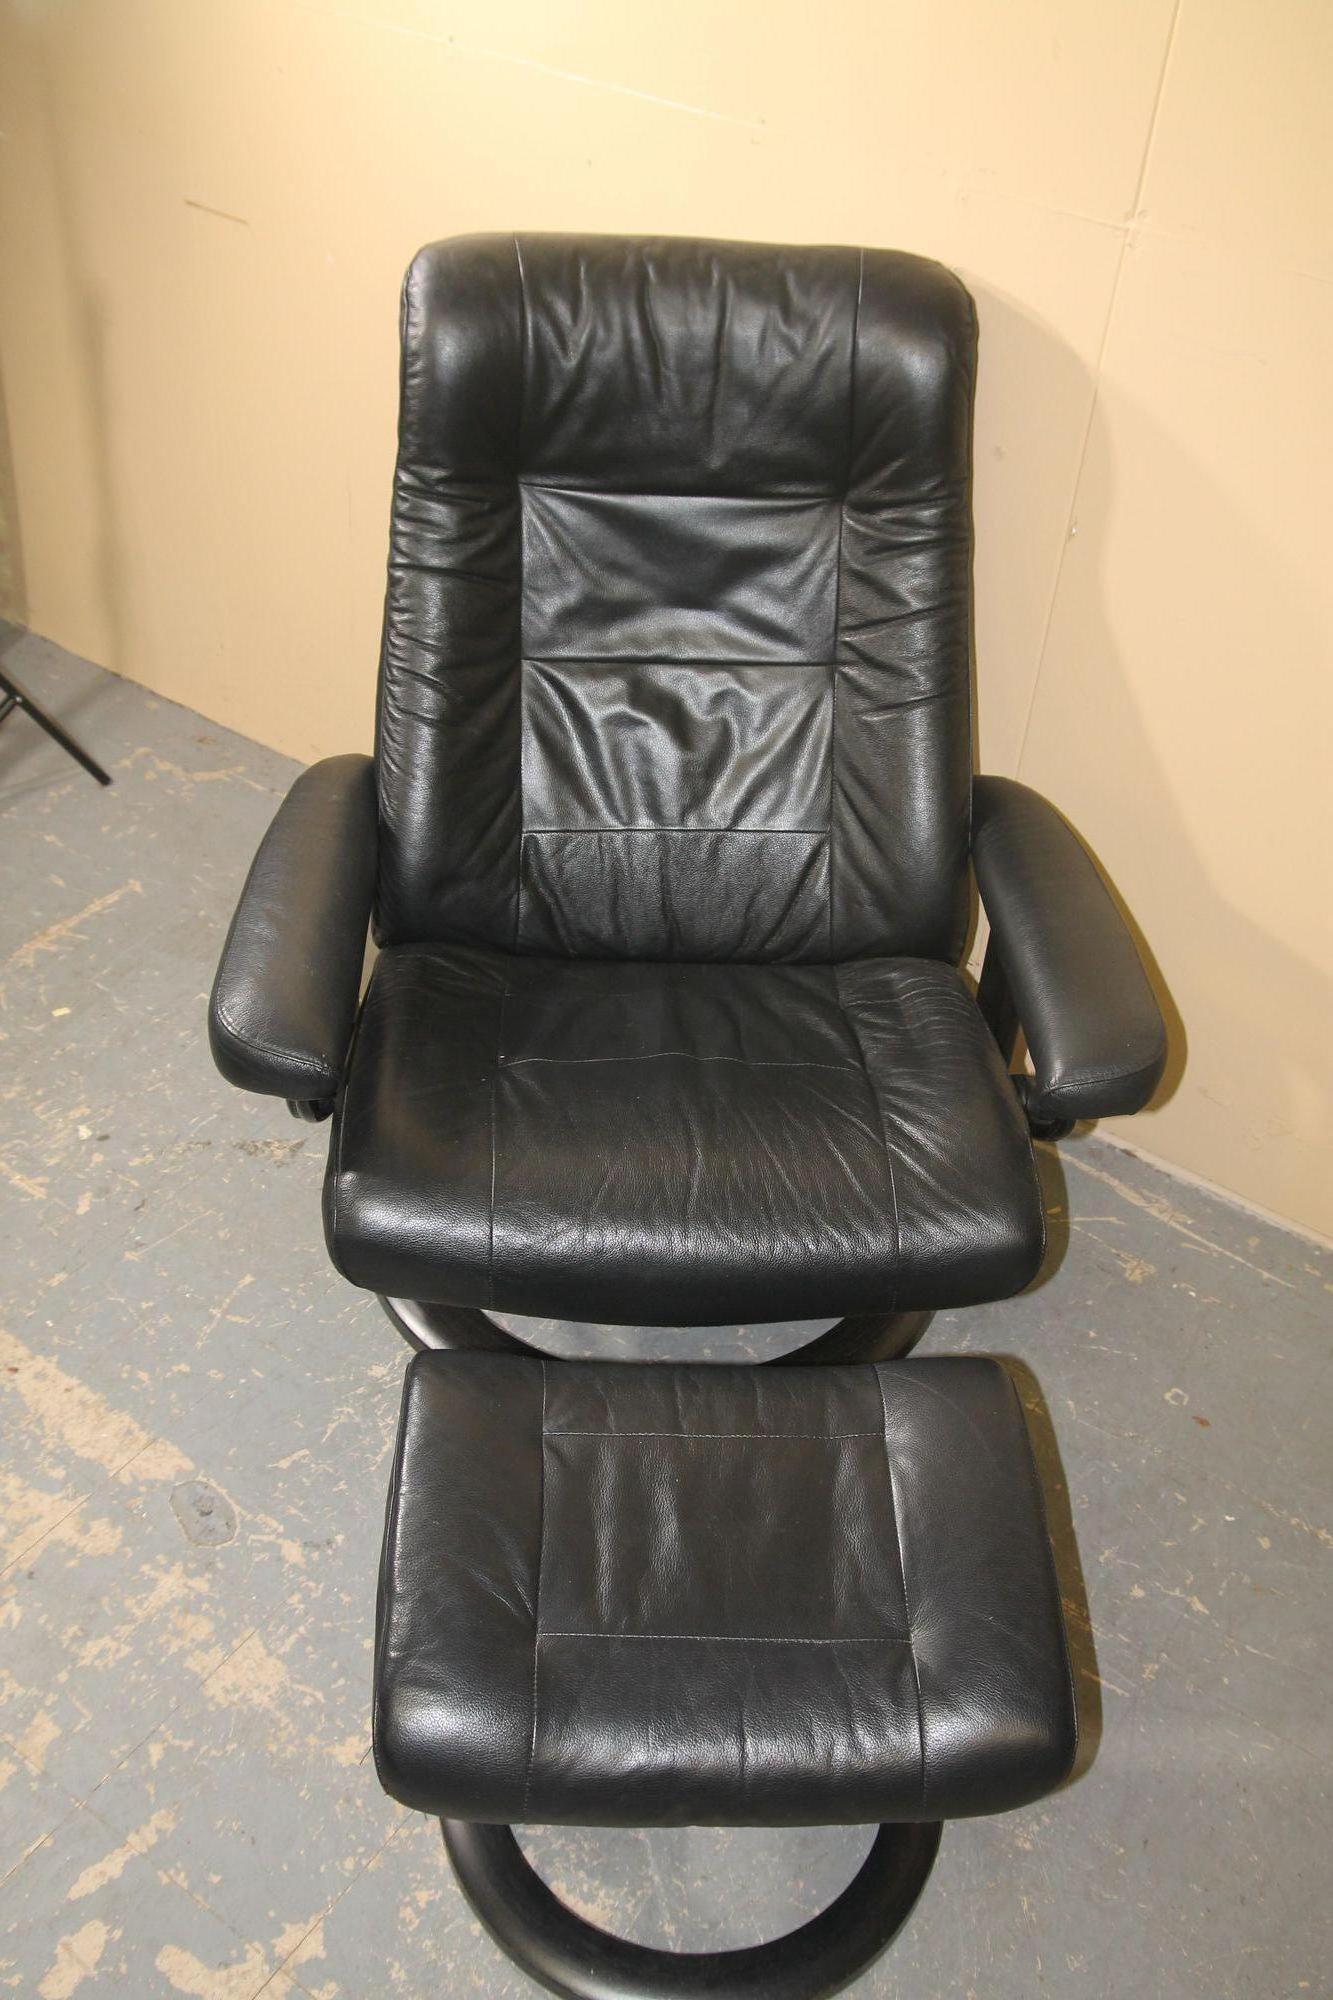 Pleased to offer, what I think is the most comfortable chair on the market, the Ekornes chair and ottoman. This leather set is in great vintage shape and has the desirable wood base.
Chair is 32 x 26 x 39
Ottoman 19 x 15 x 15